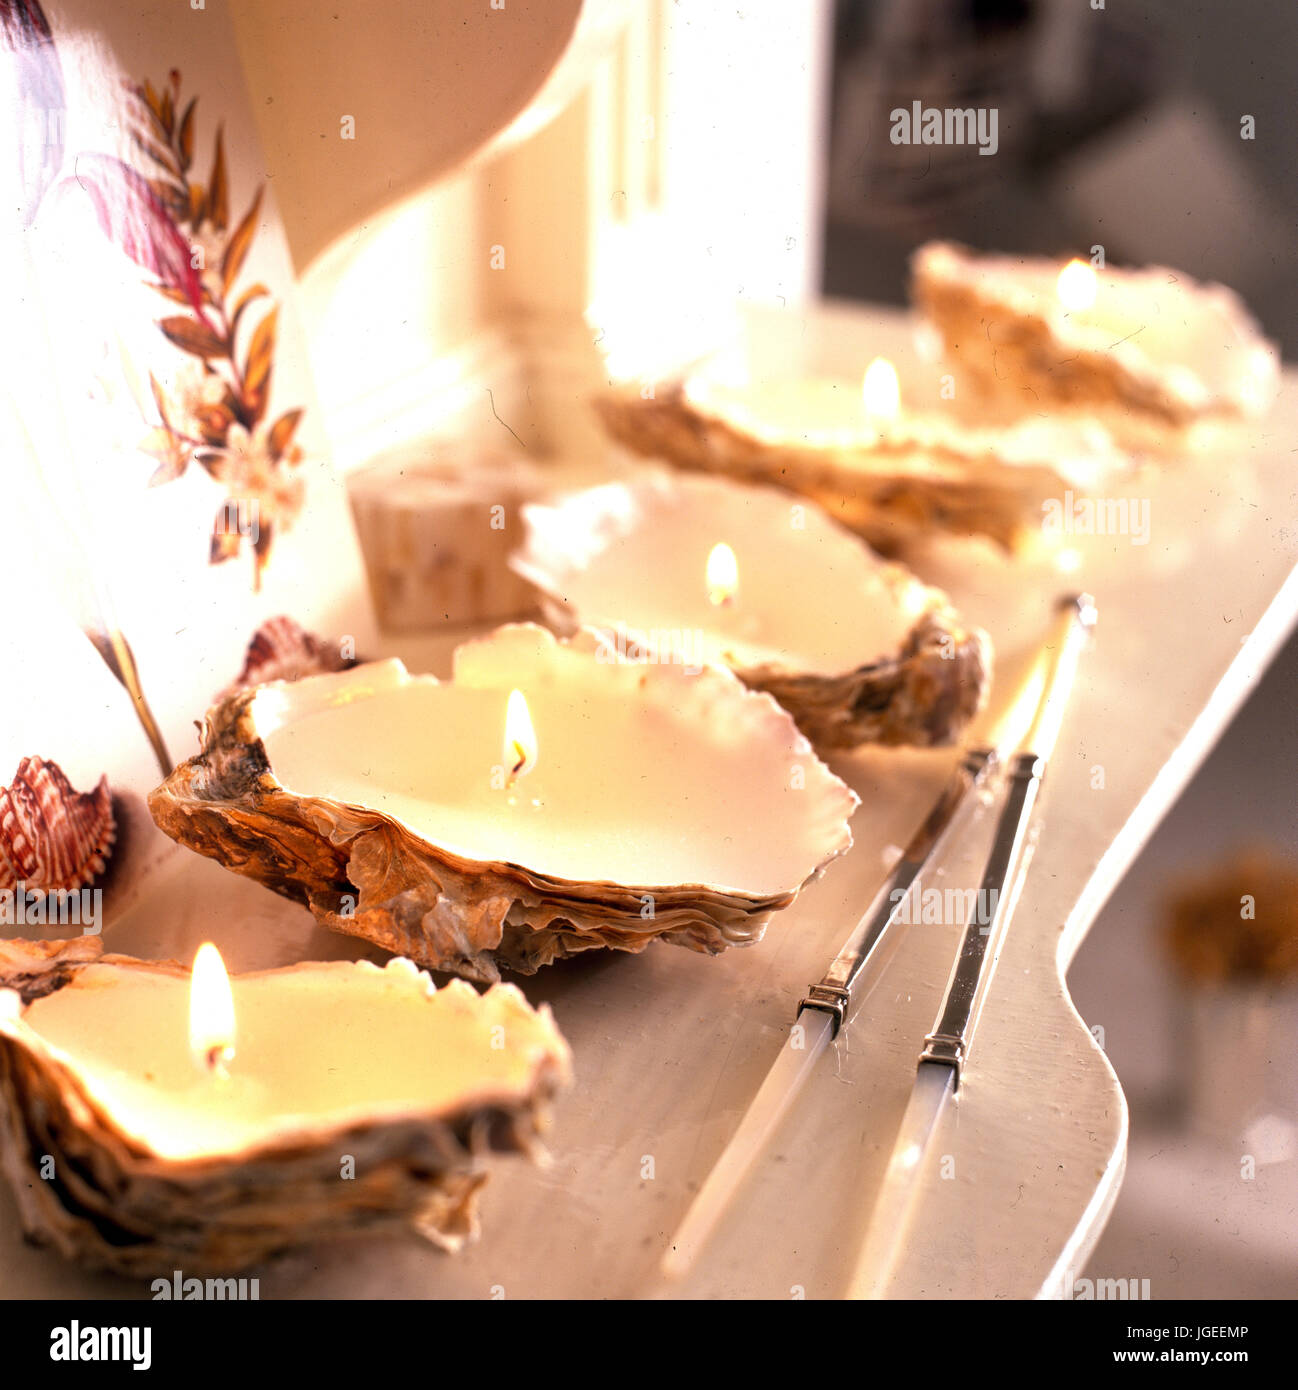 Oyster shells used as candle holders Stock Photo - Alamy